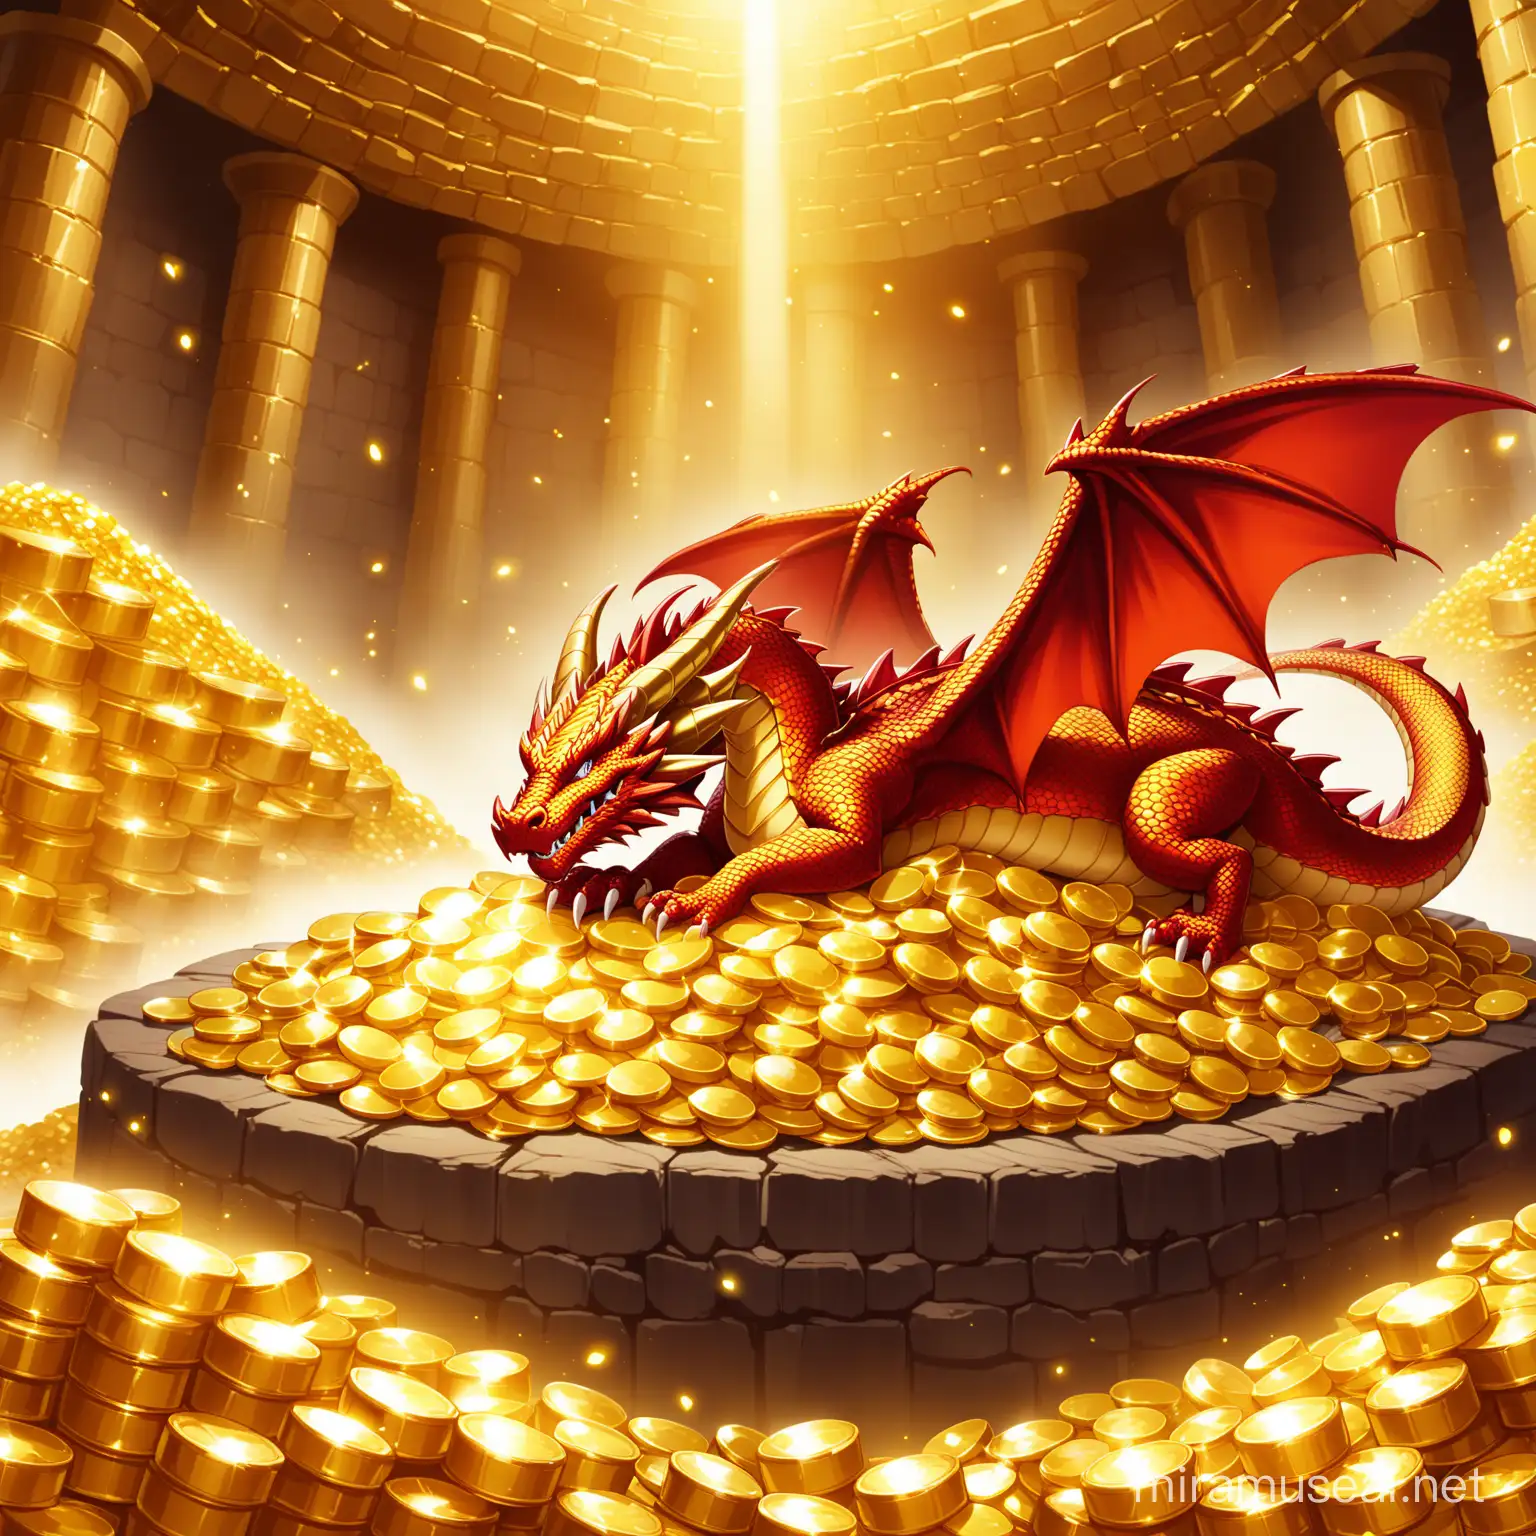 dragon, red, sleeping on pile of gold, treasure room background